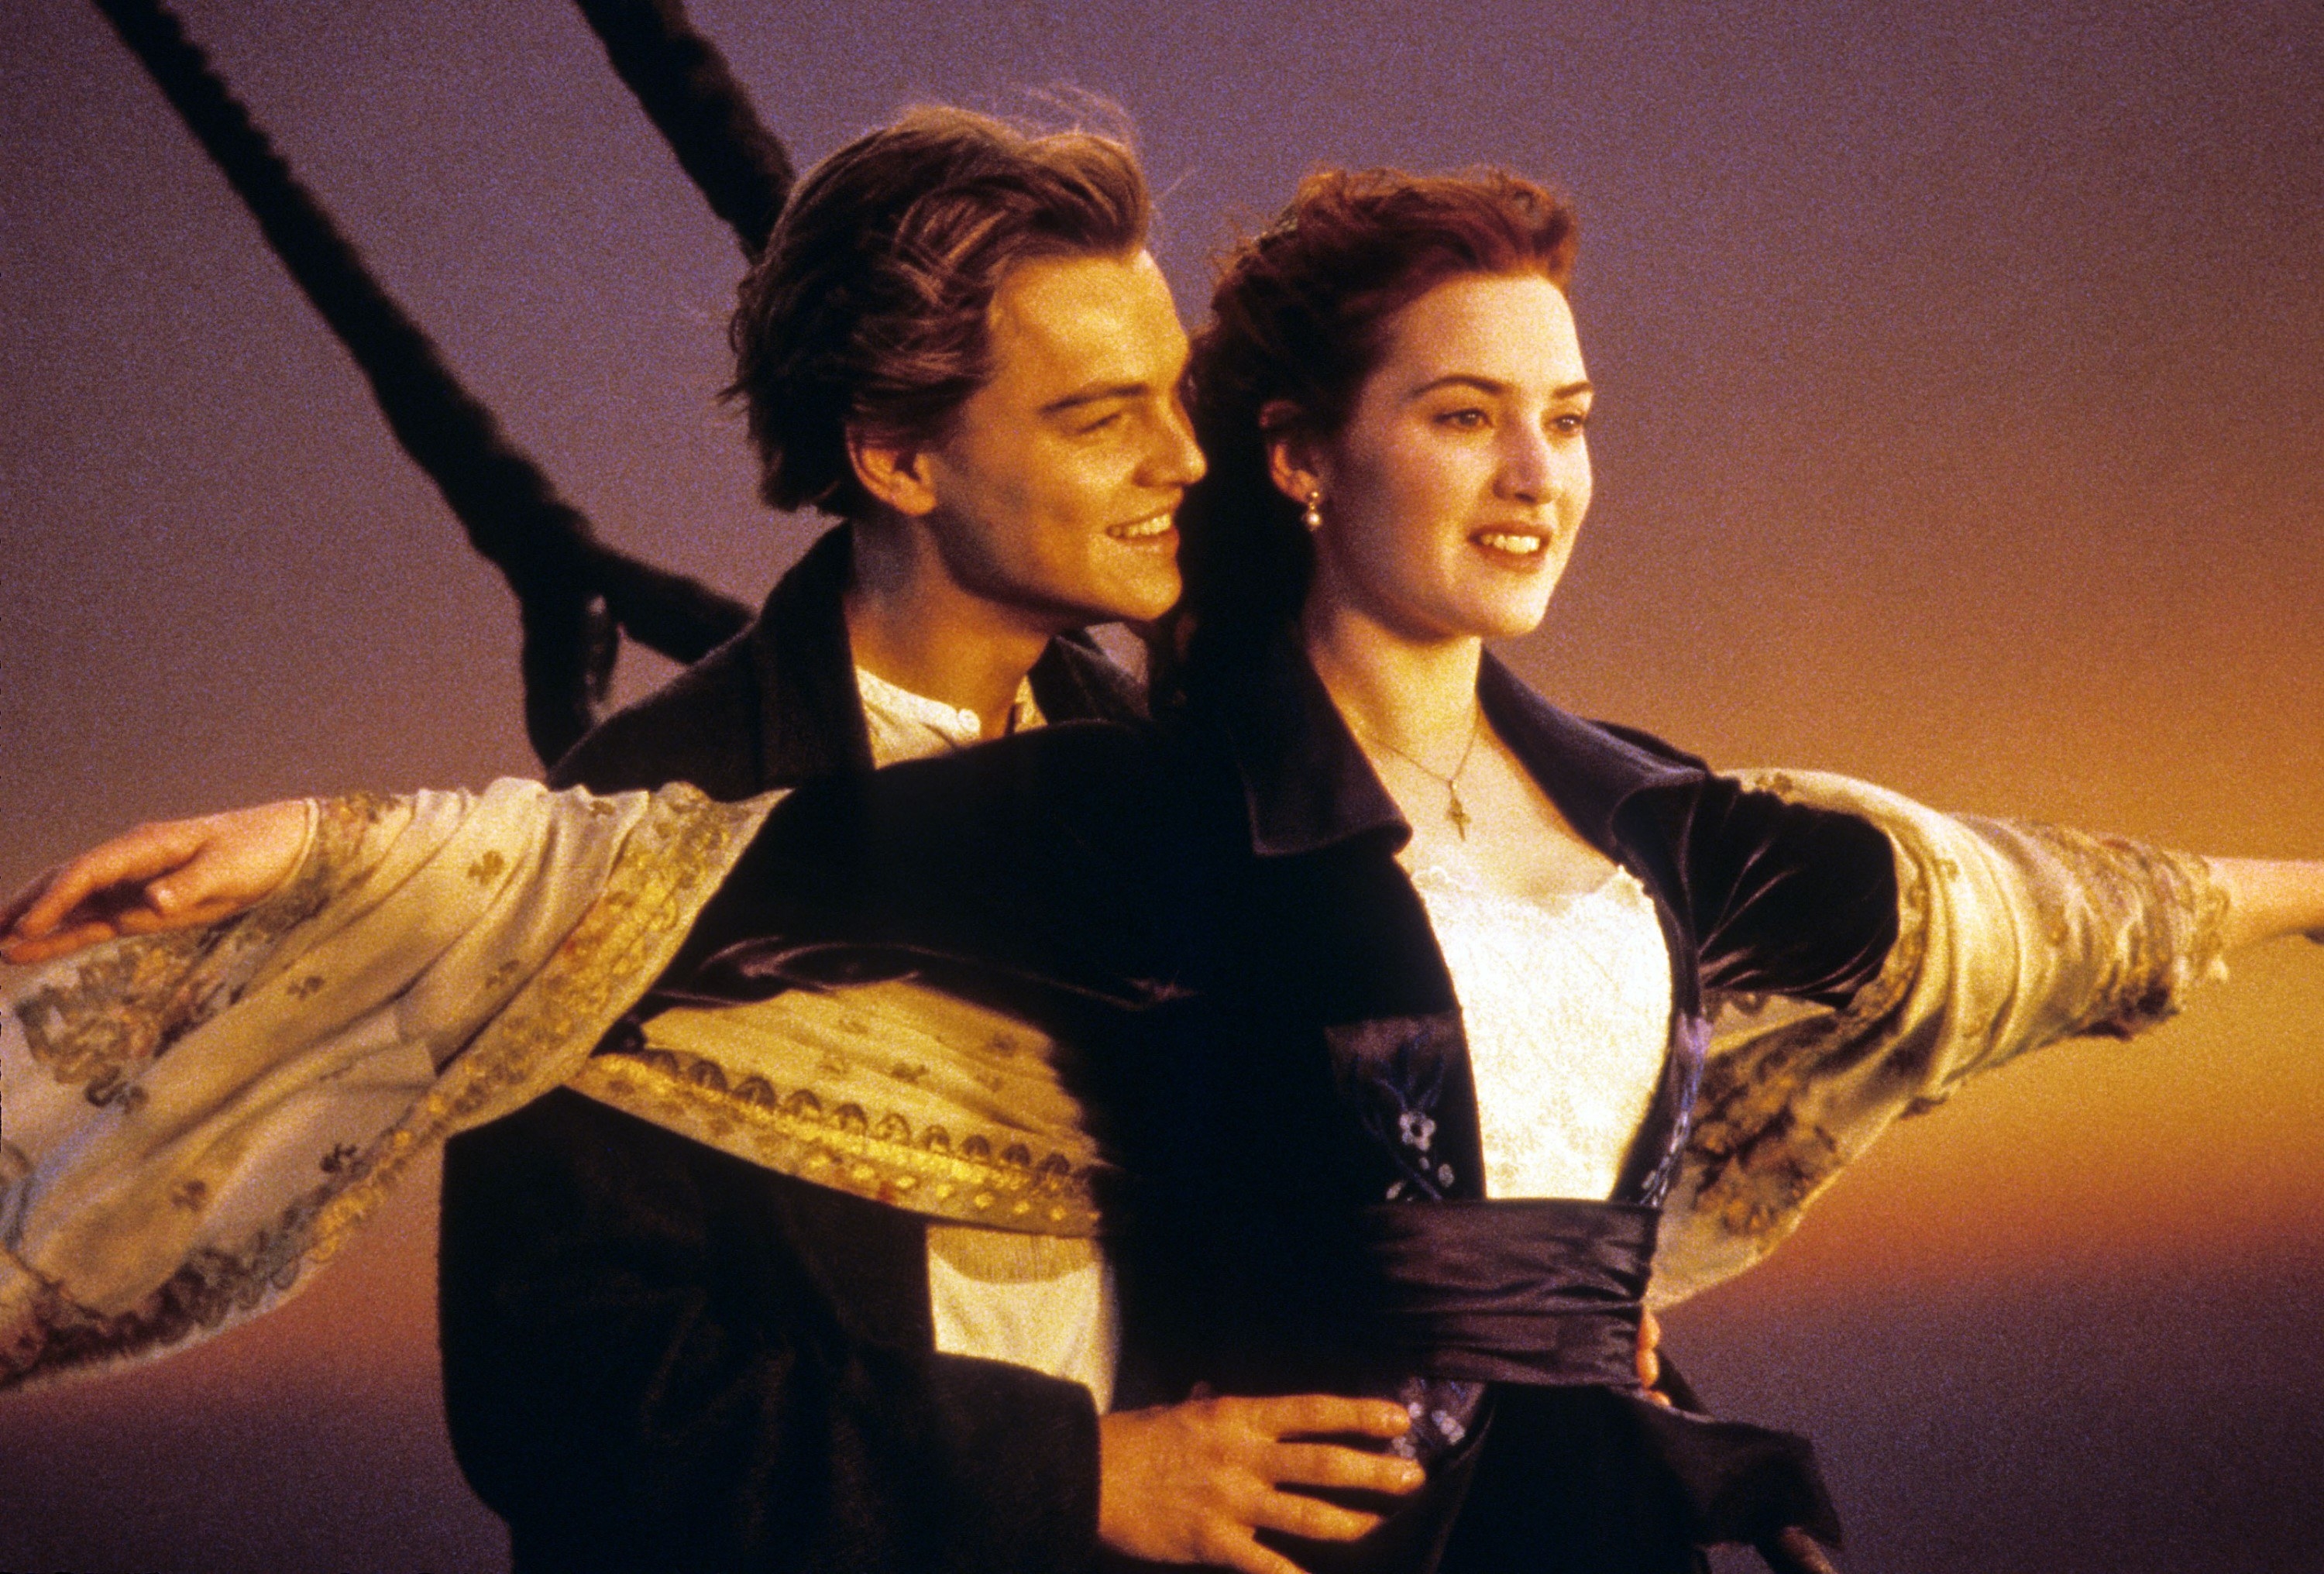 Jack and Rose at the front of the ship, Rose&#x27;s arms outstretched, Jack holding her waist